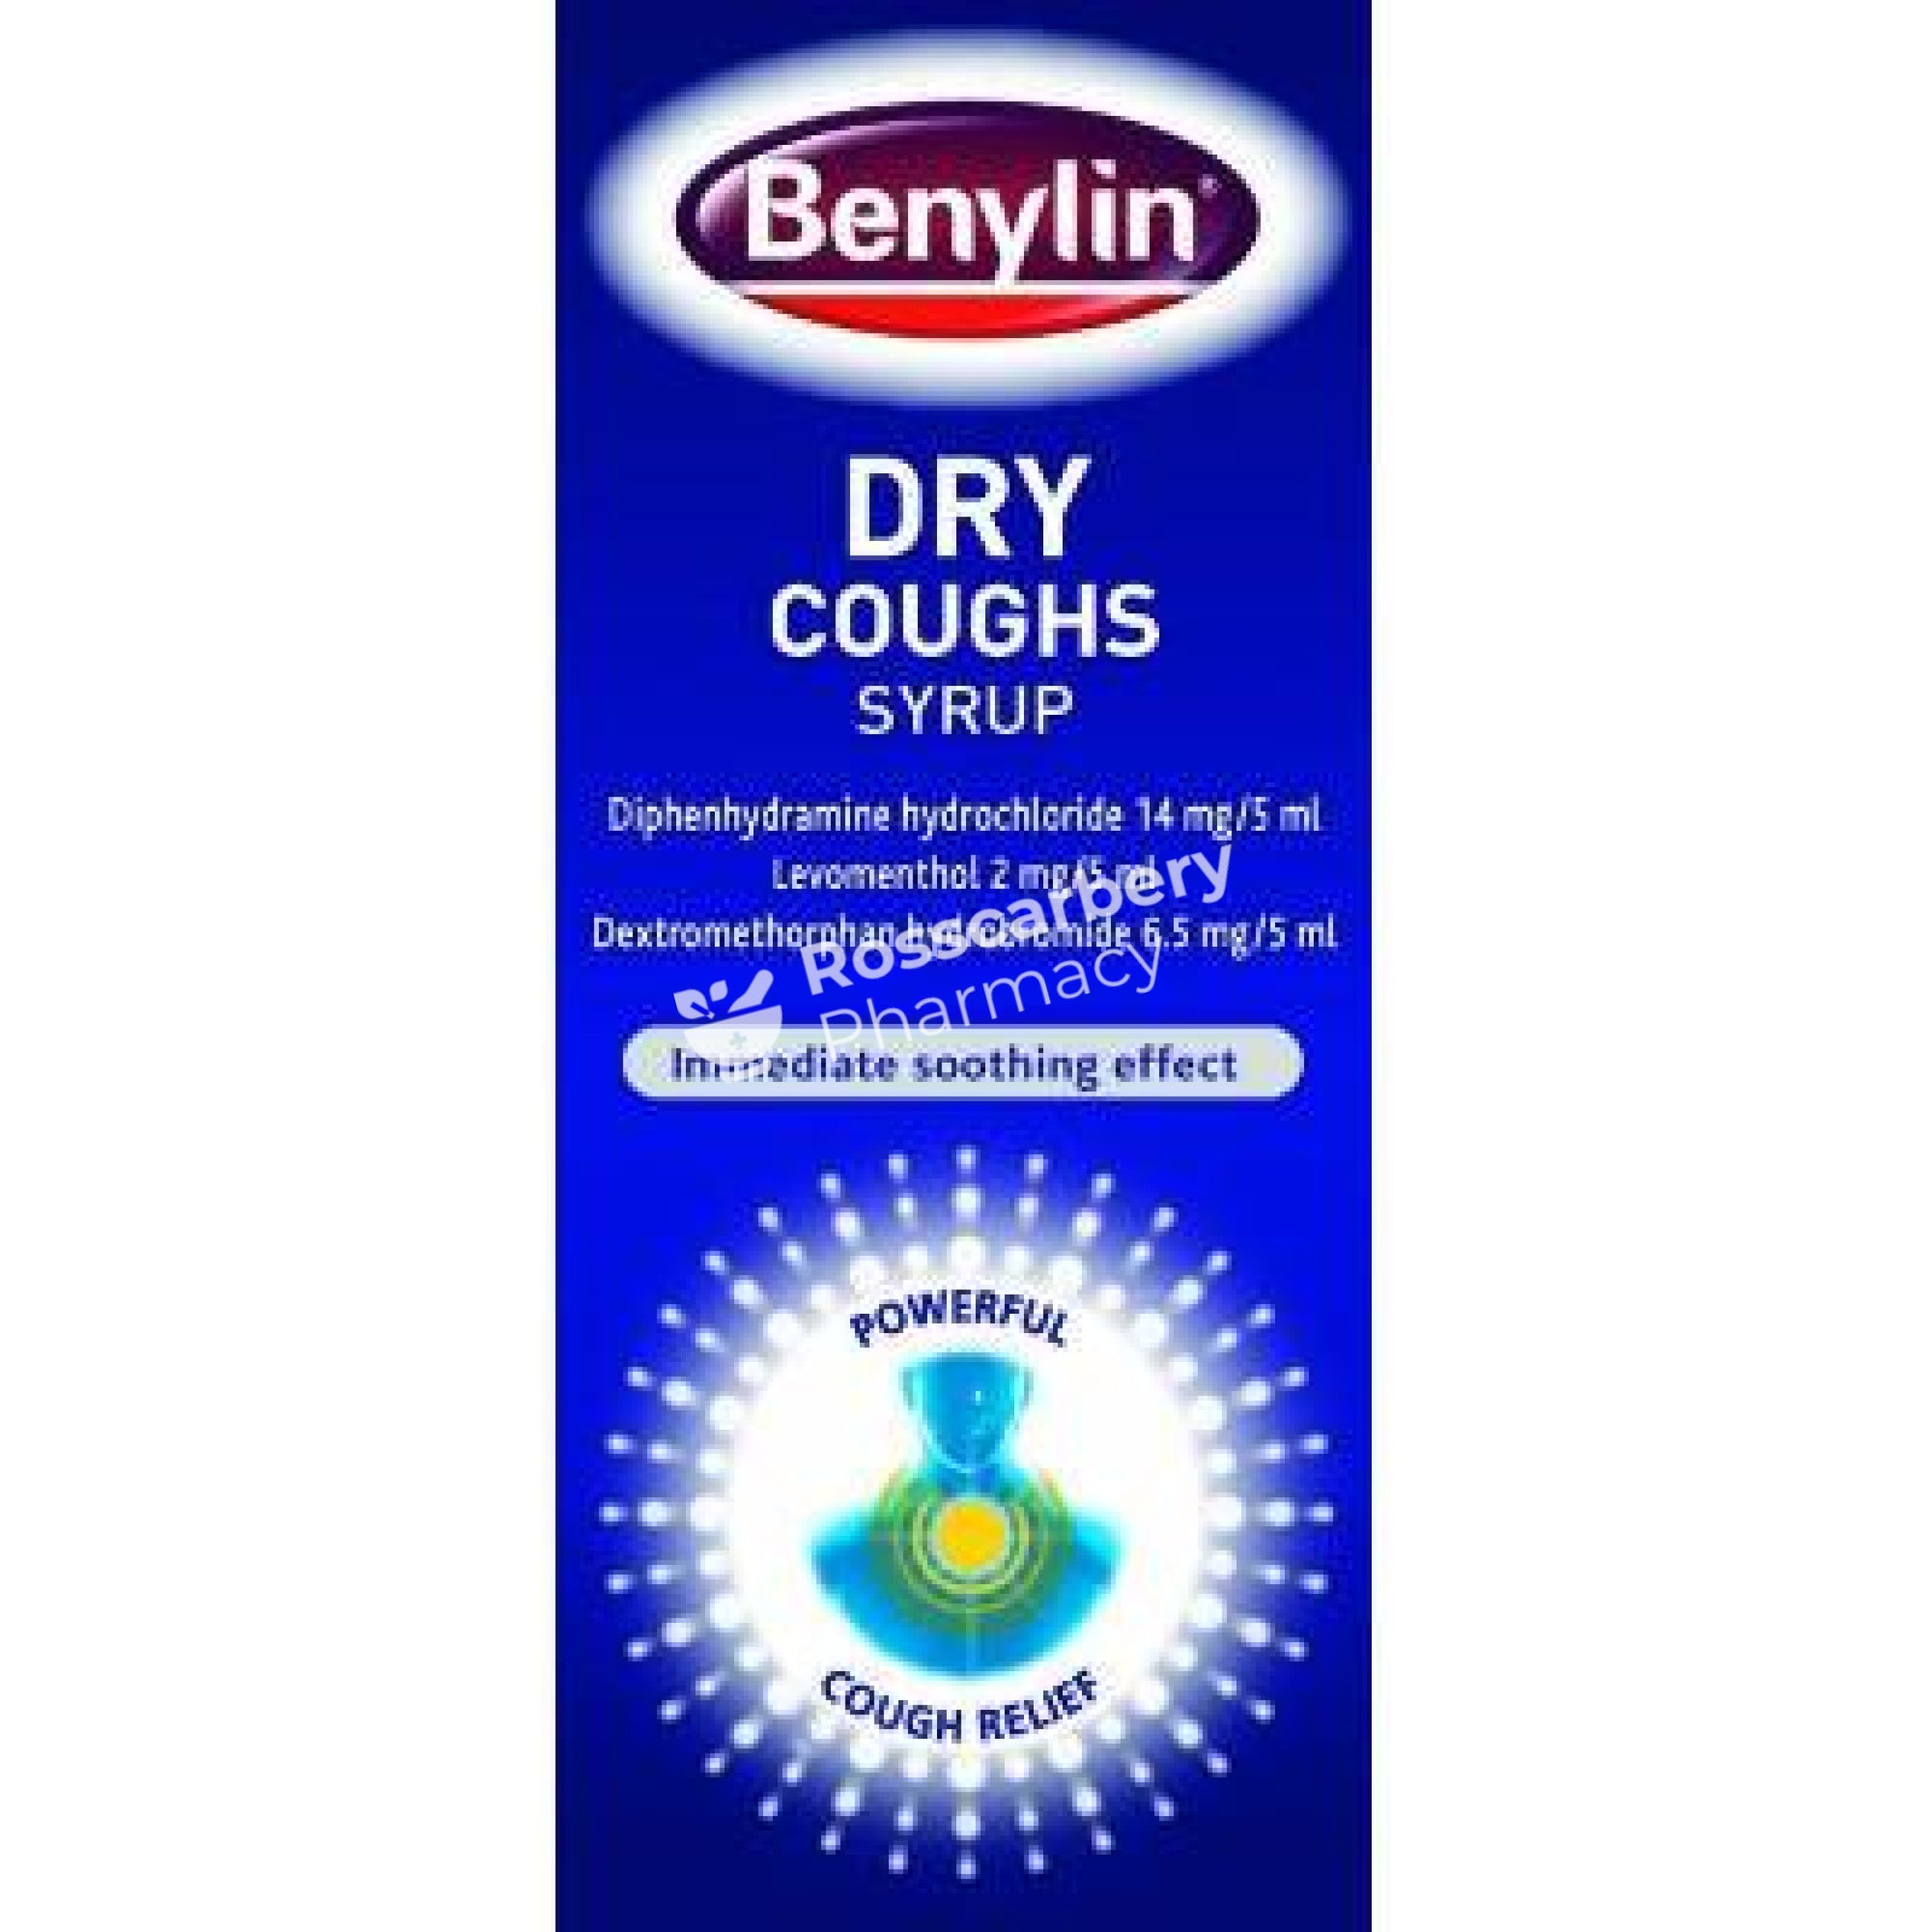 Benylin Dry Cough Syrup - Drowsy Bottles